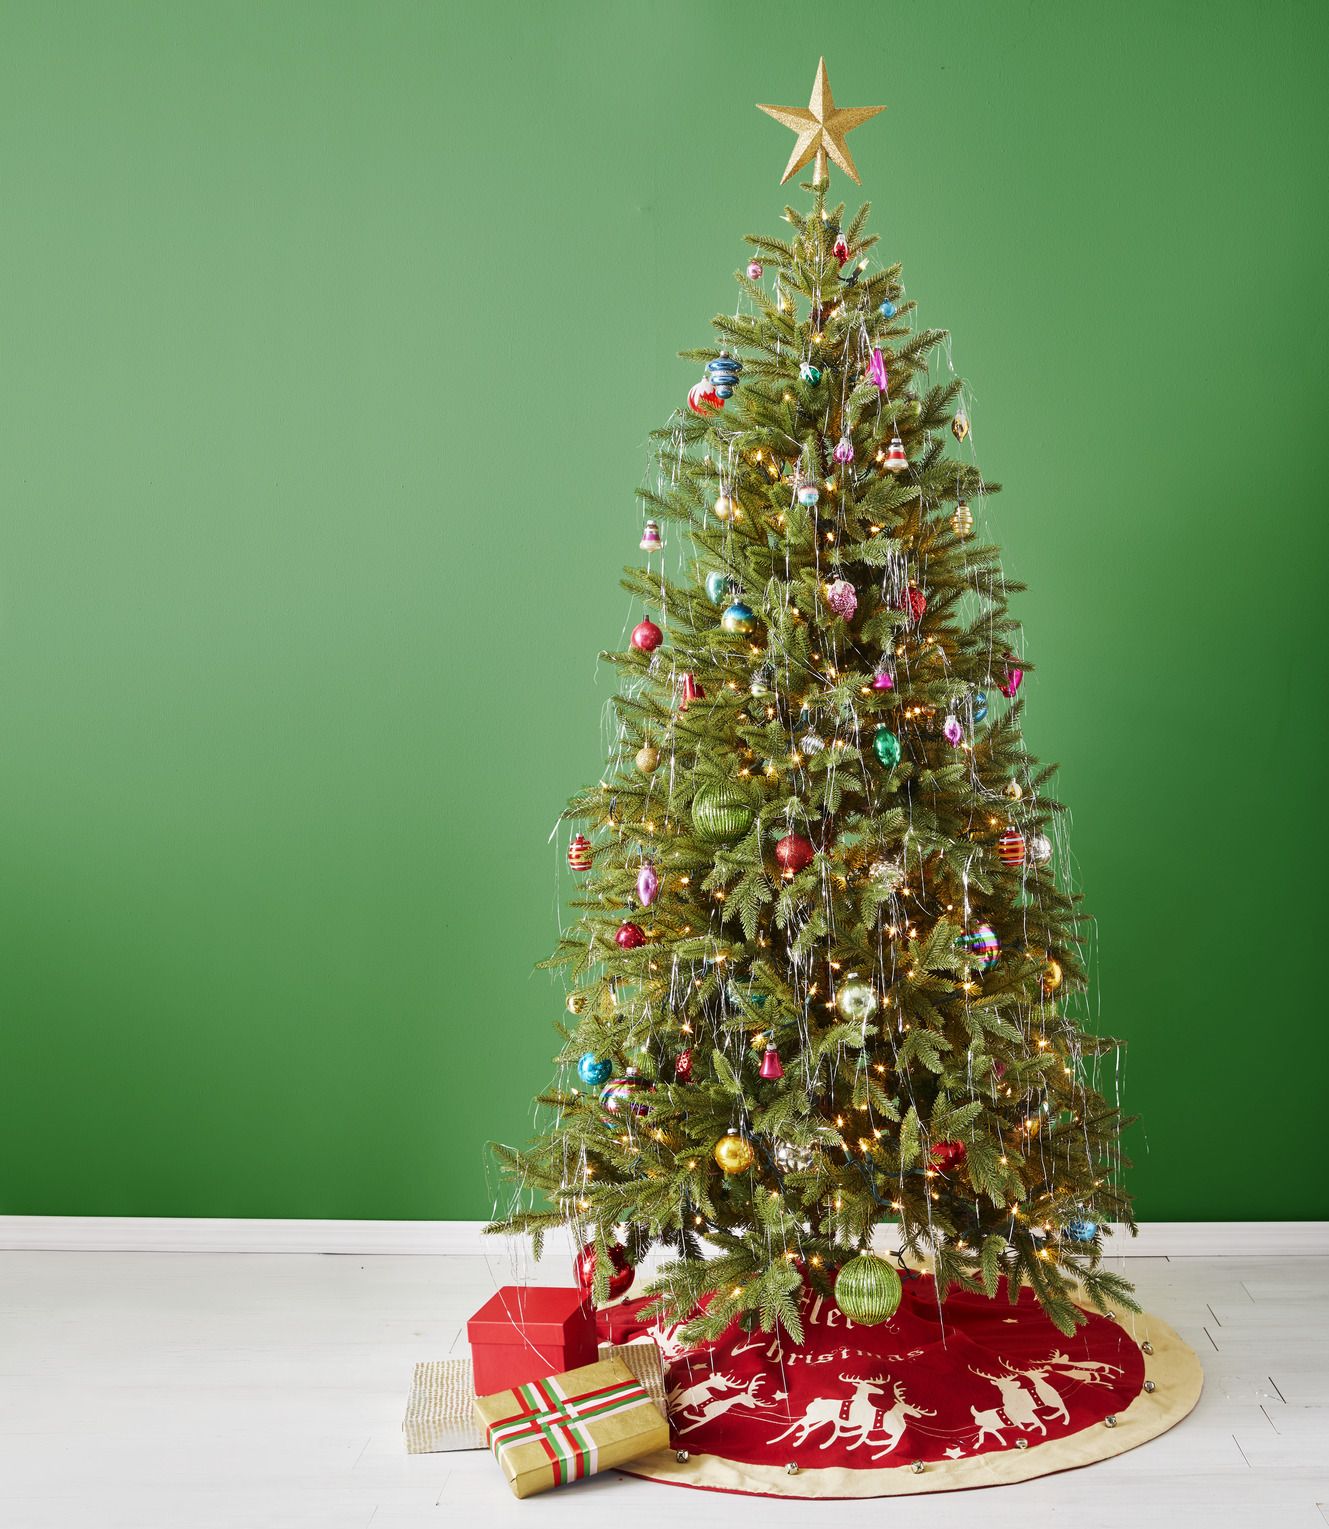 Christmas Tree Decorating Ideas 2022: 68 Best Themes & Trends